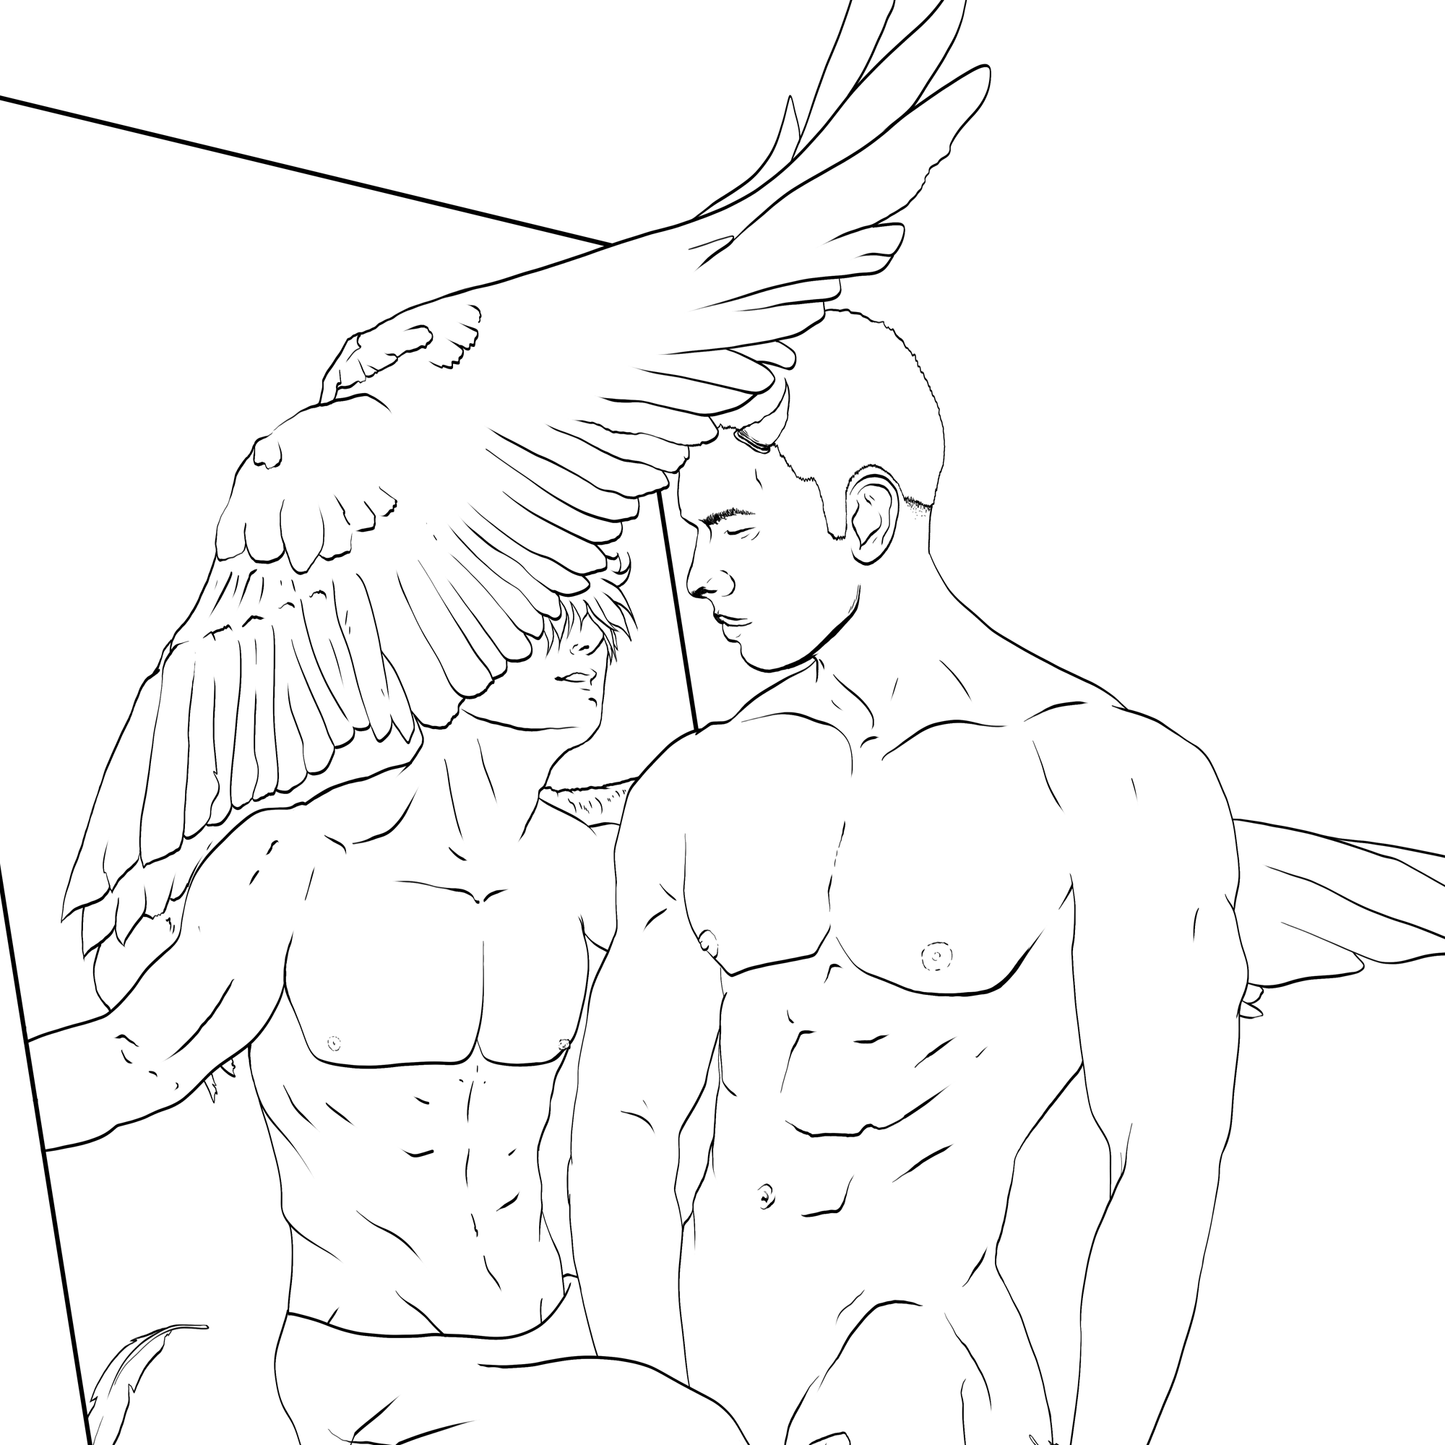 Gay and Queer 18/21+ Adult Coloring Book